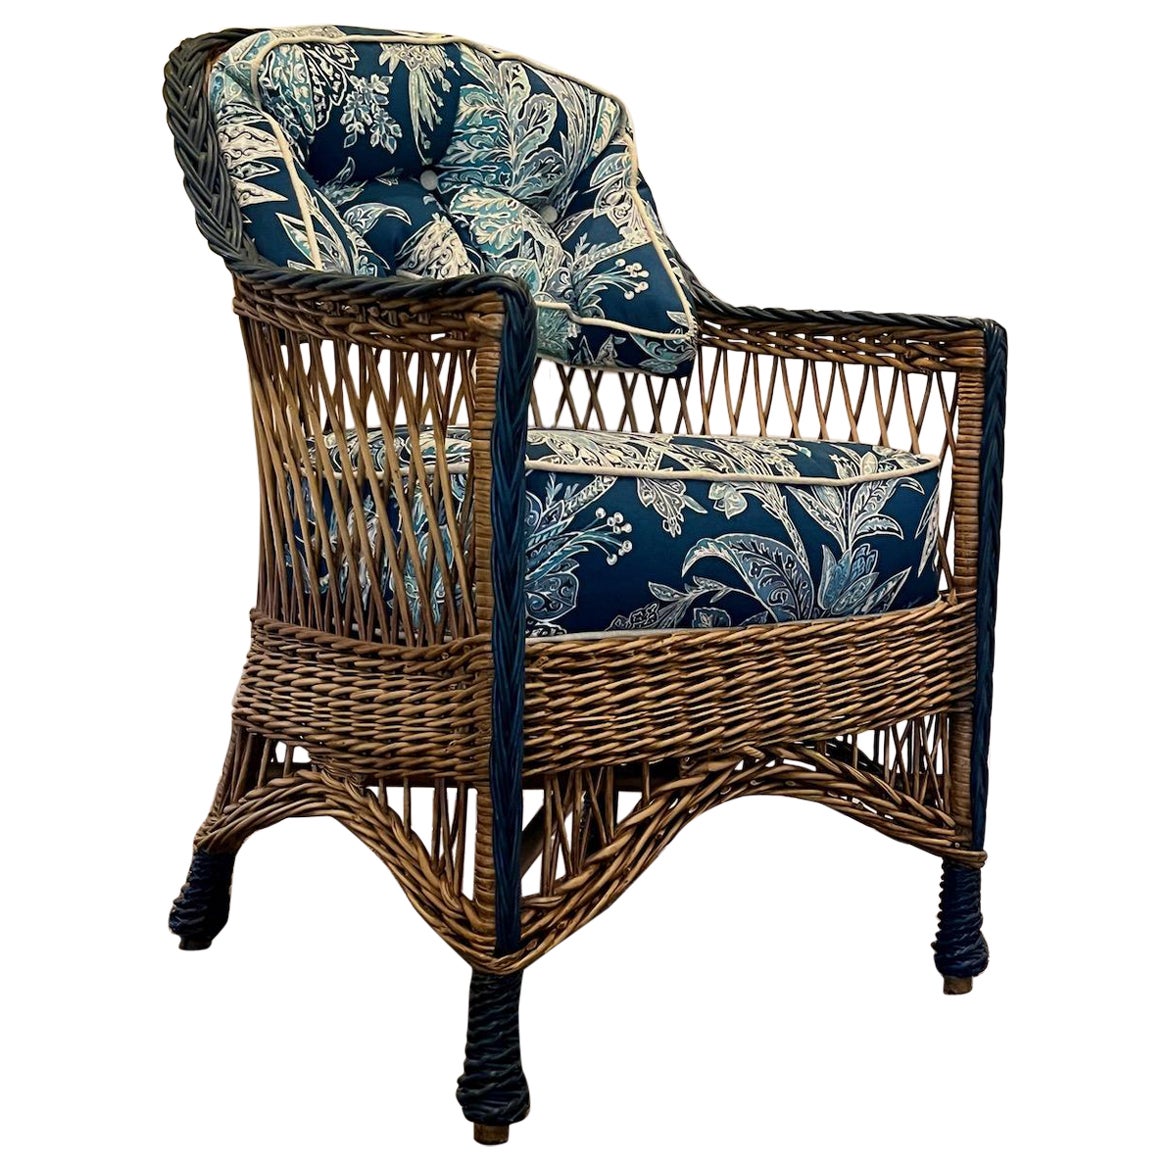 An Antique Hand Woven Natural Finish Bar Harbor Style Arm Chair With Blue Trim For Sale